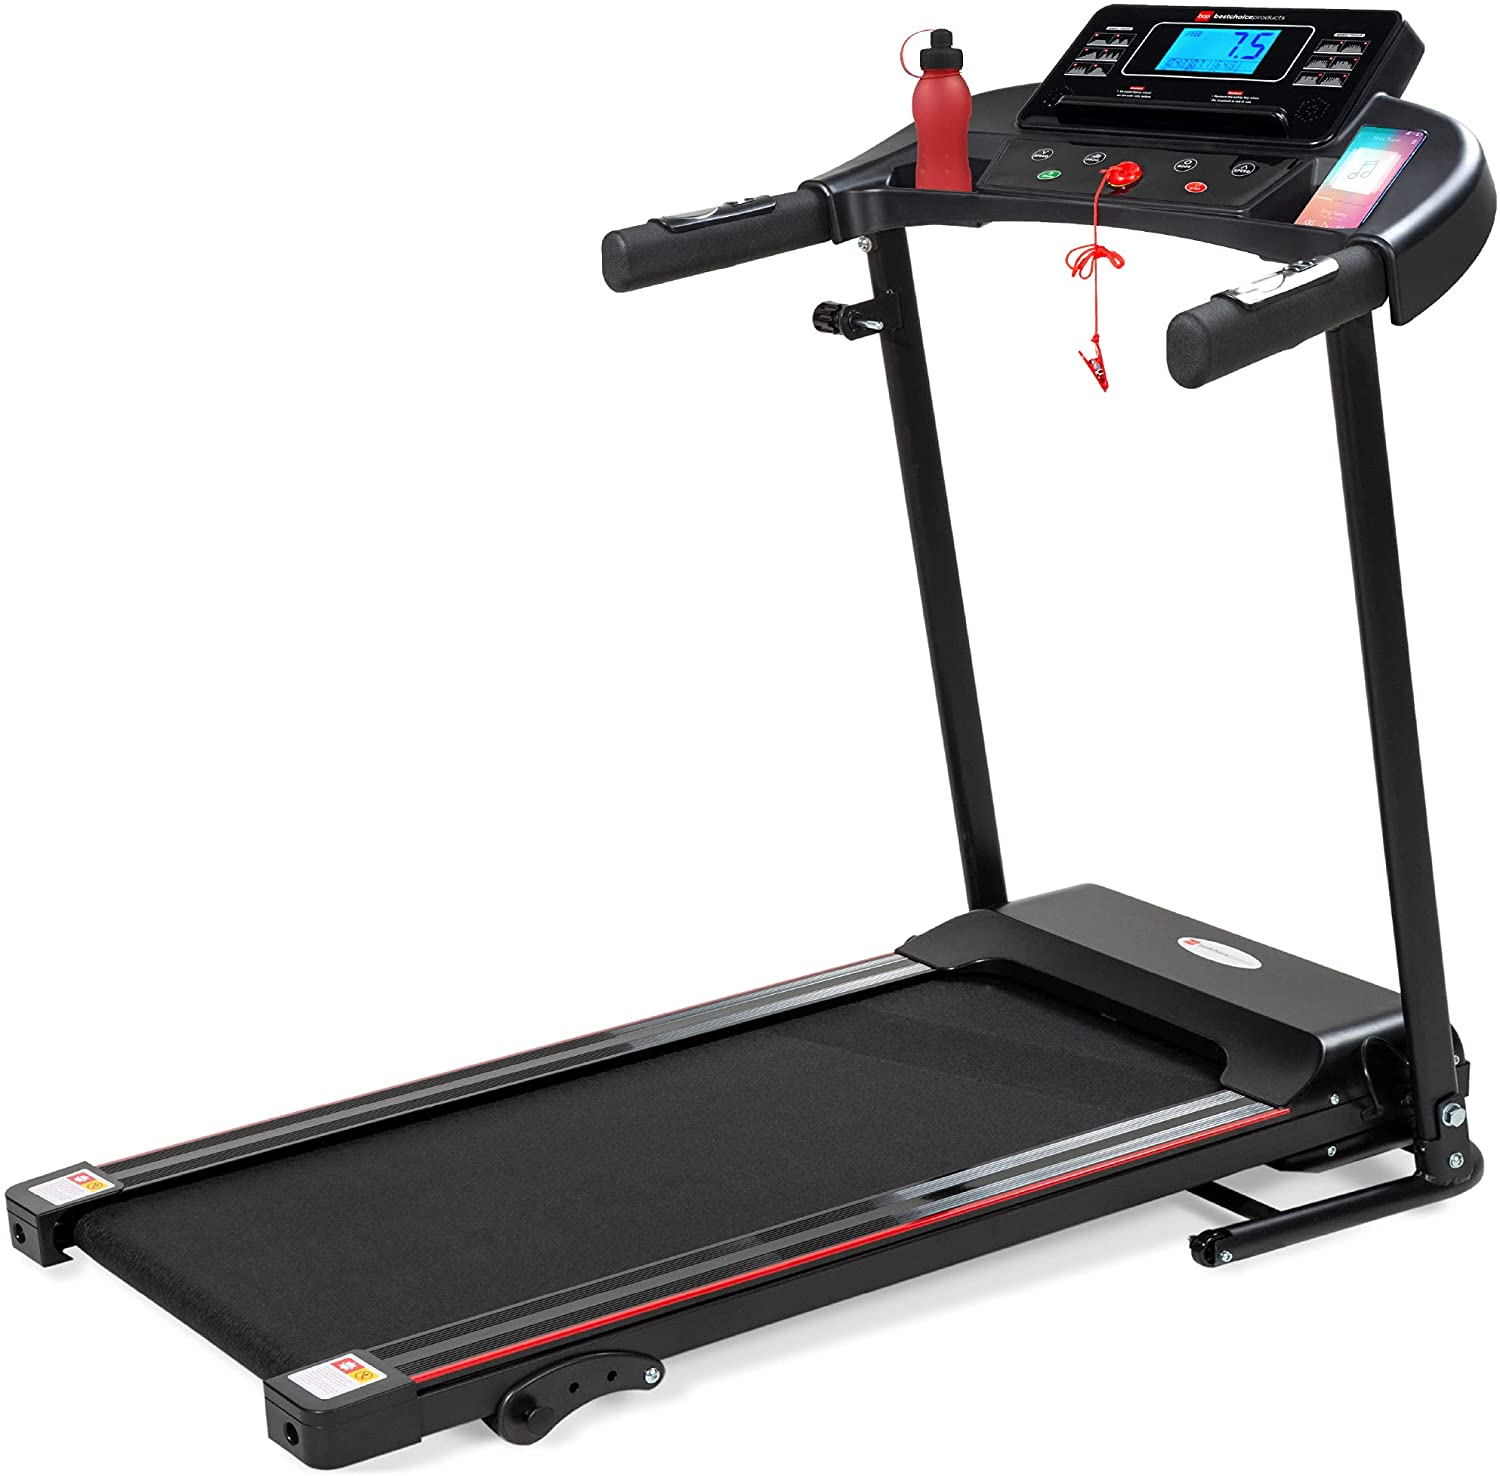 Great Compact Treadmill